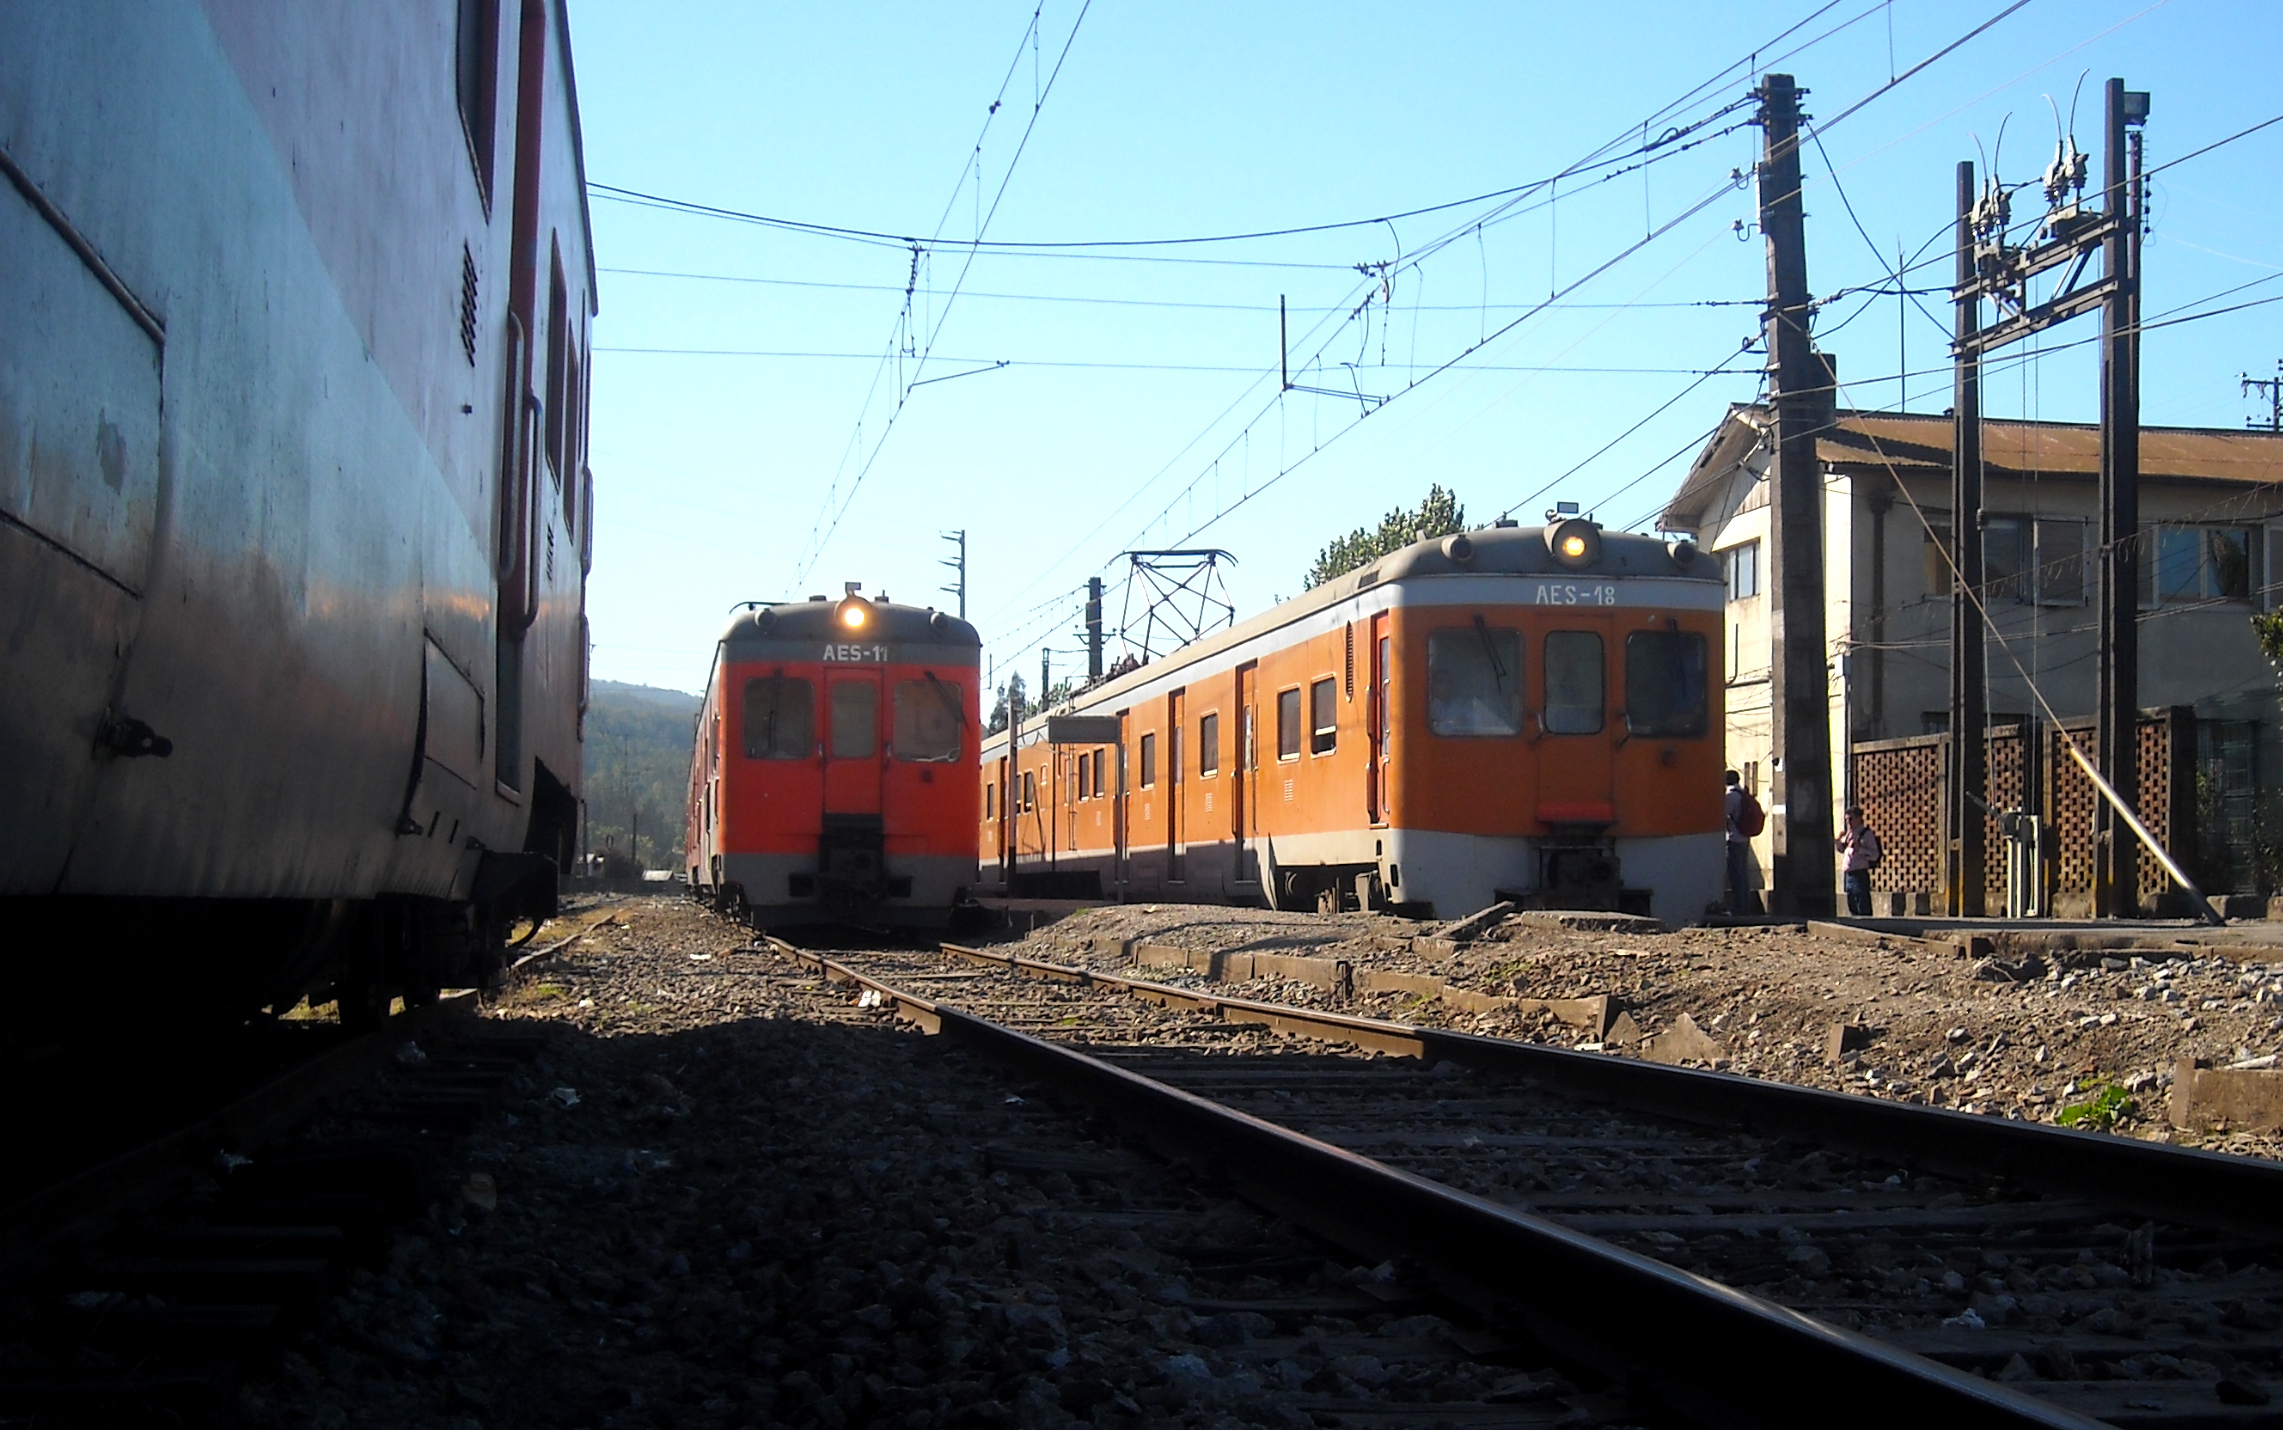 two trains going on opposite tracks, with the engine stopped